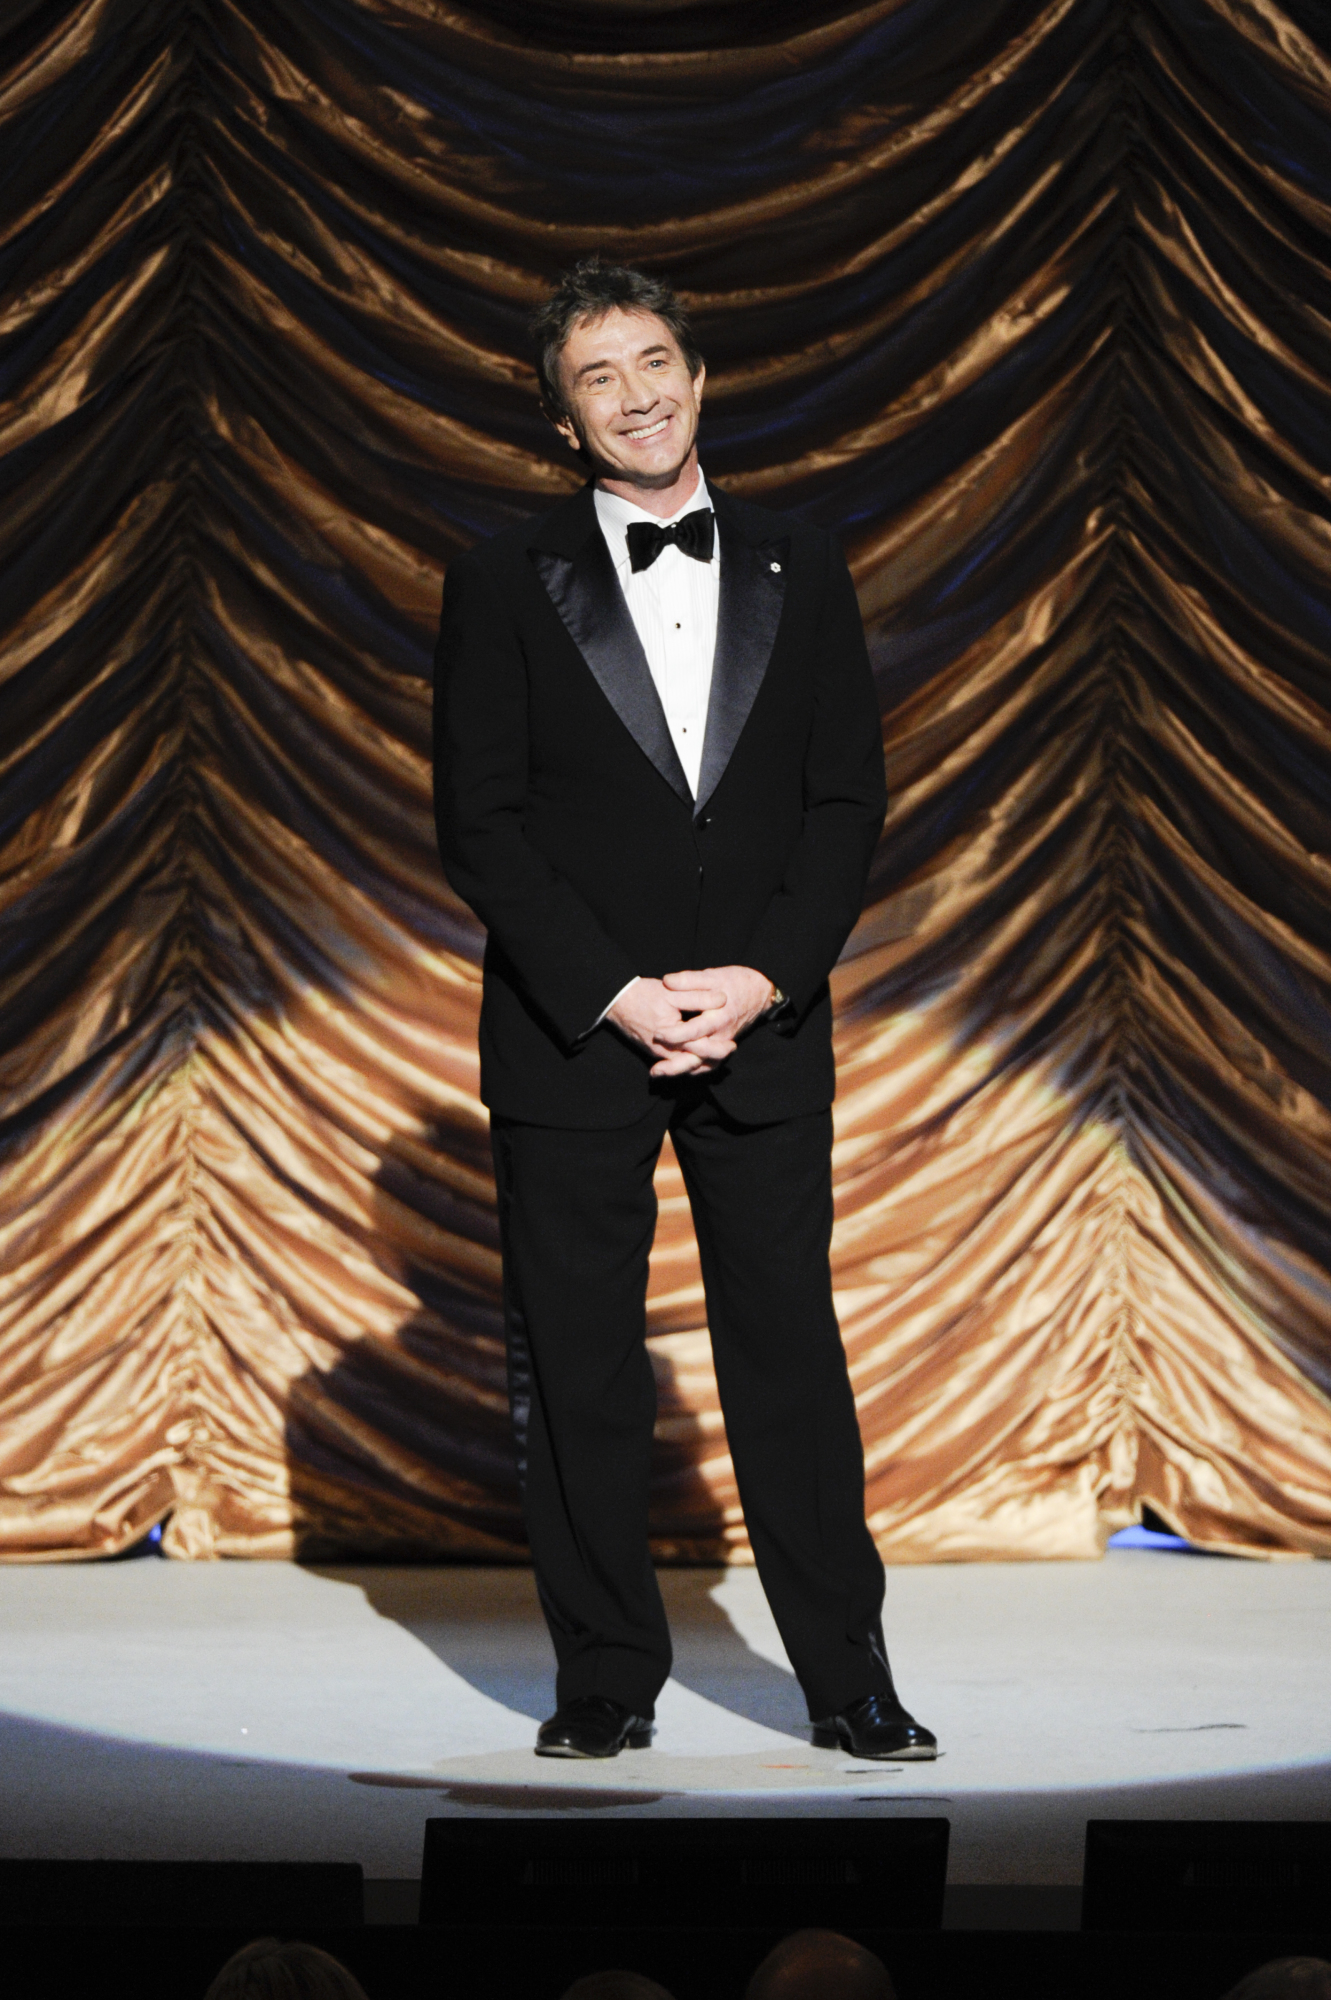 Martin Short Smiles at the Audience